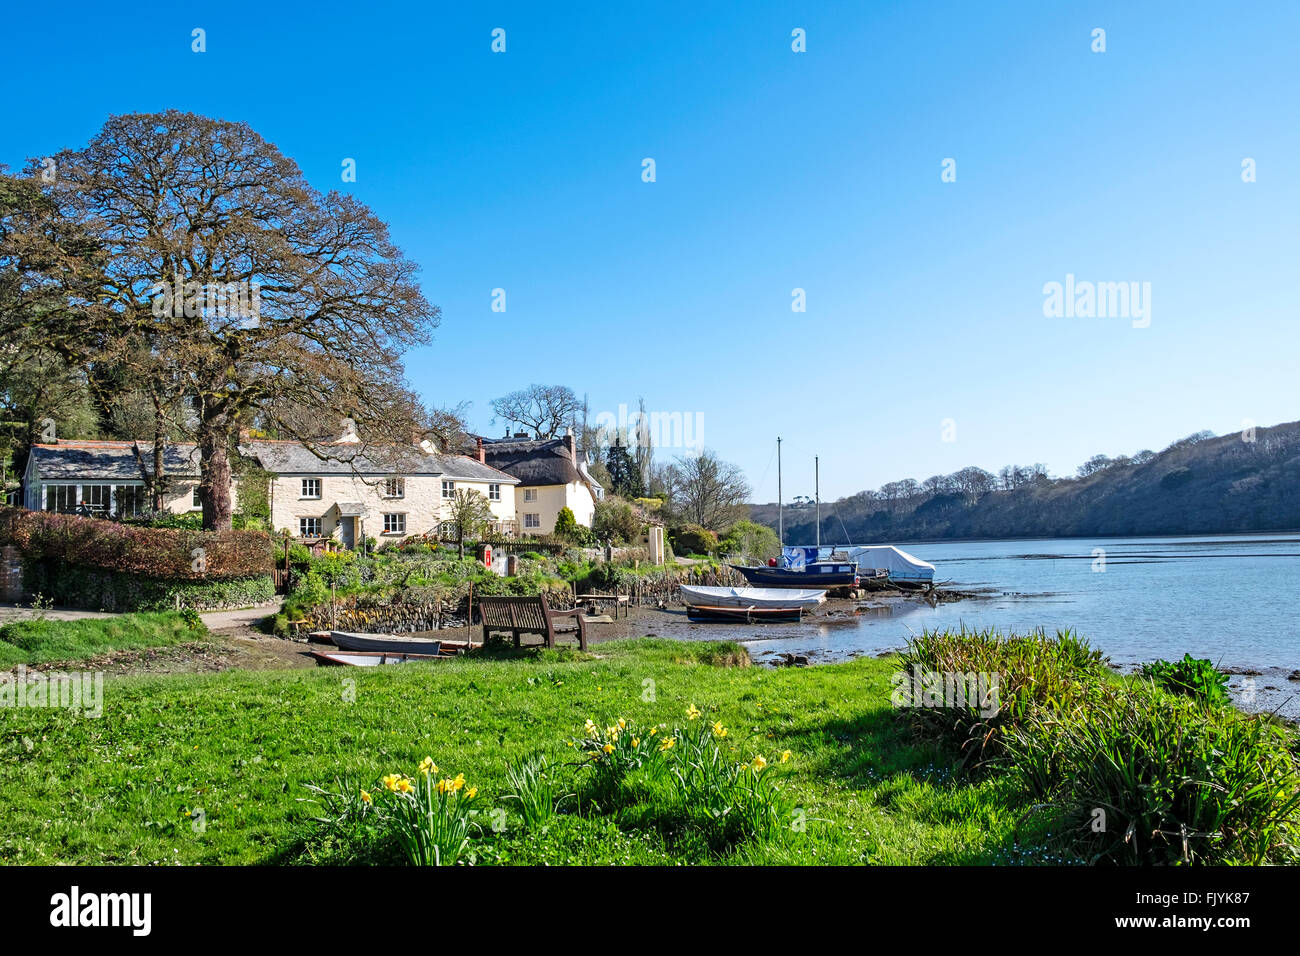 The riverside hamlet of St.Clement near Truro in Cornwall, England, UK Stock Photo